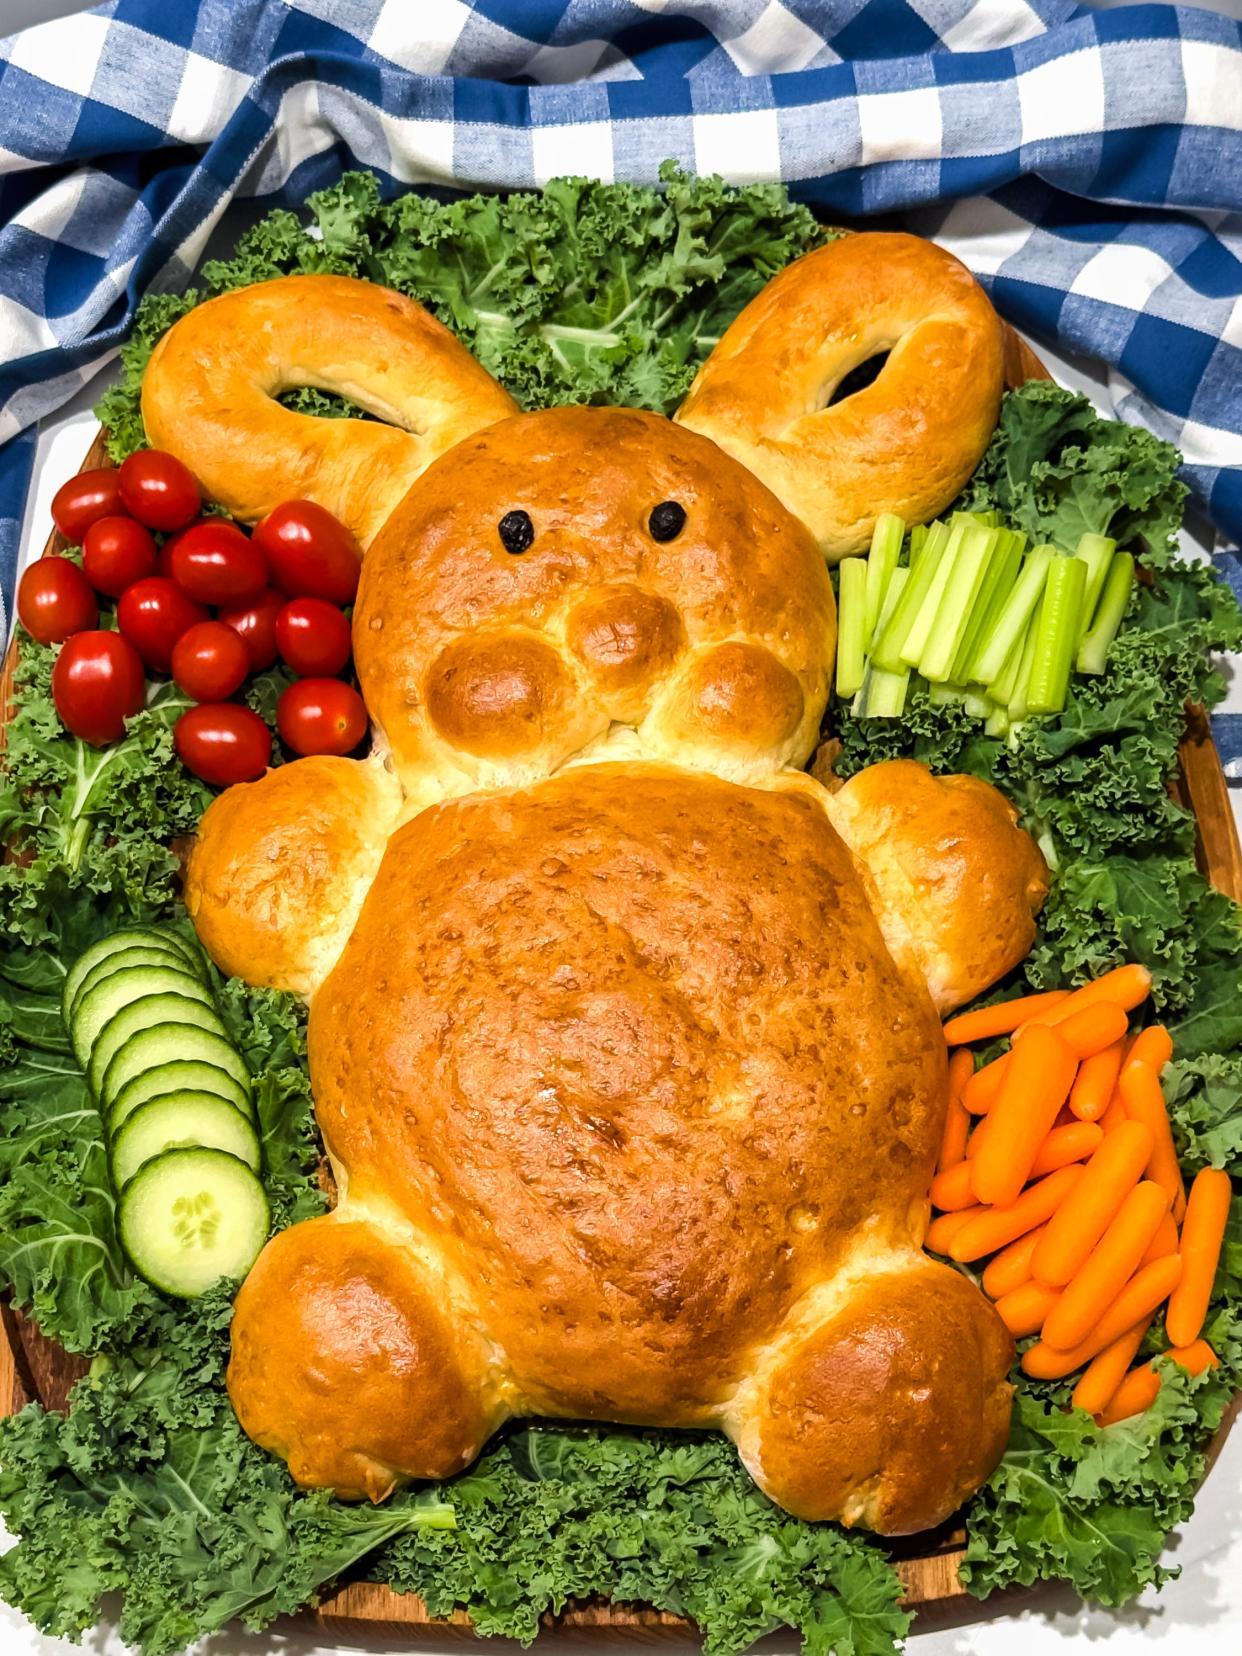 Easter Bunny-shaped French Bread is a unique and eye-catching centerpiece that adds a special touch to your Easter feast.